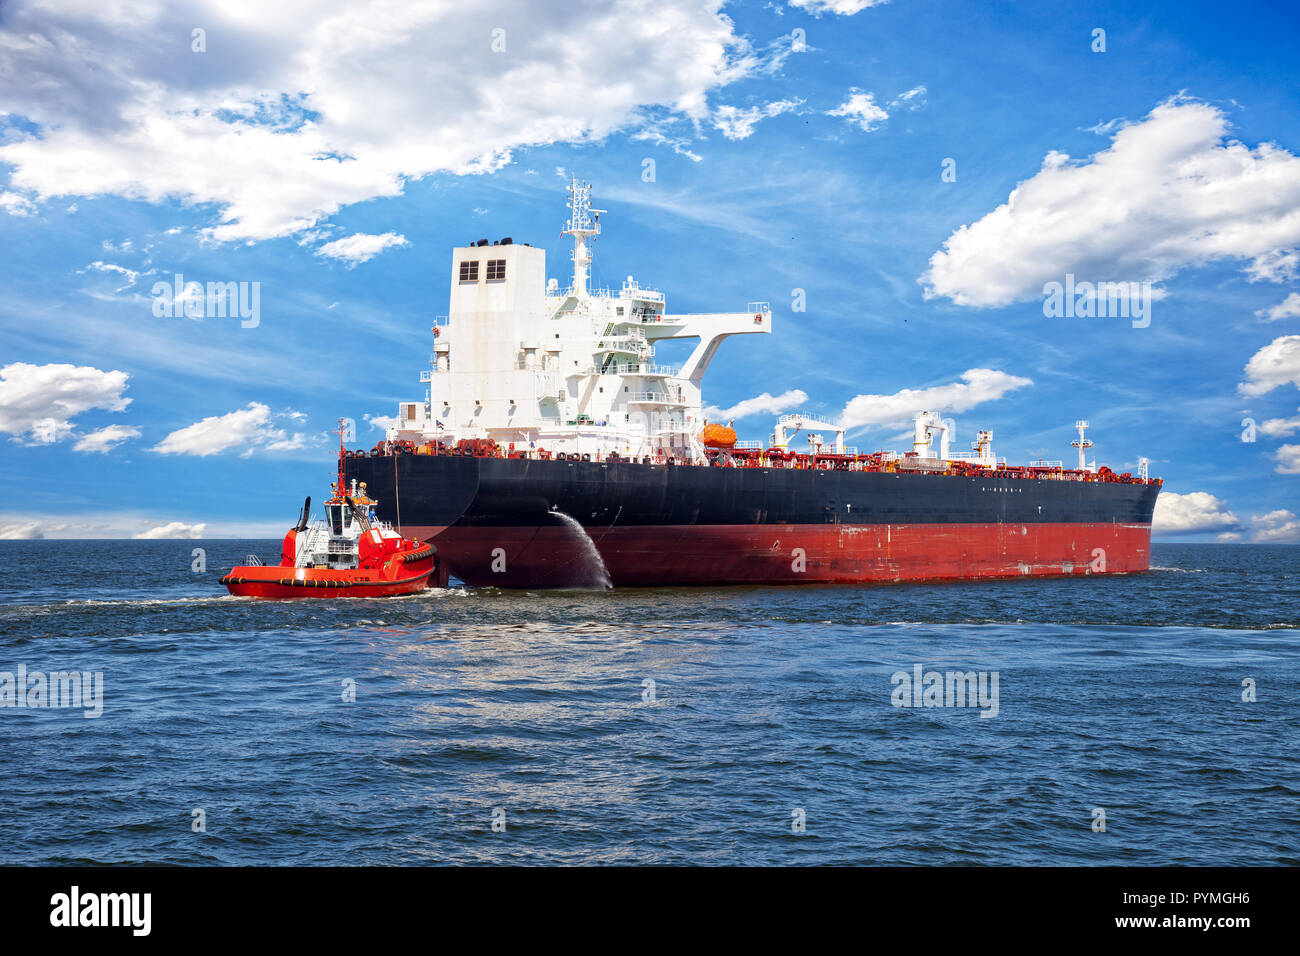 Red tug boat approaching to assist tanker Stock Photo